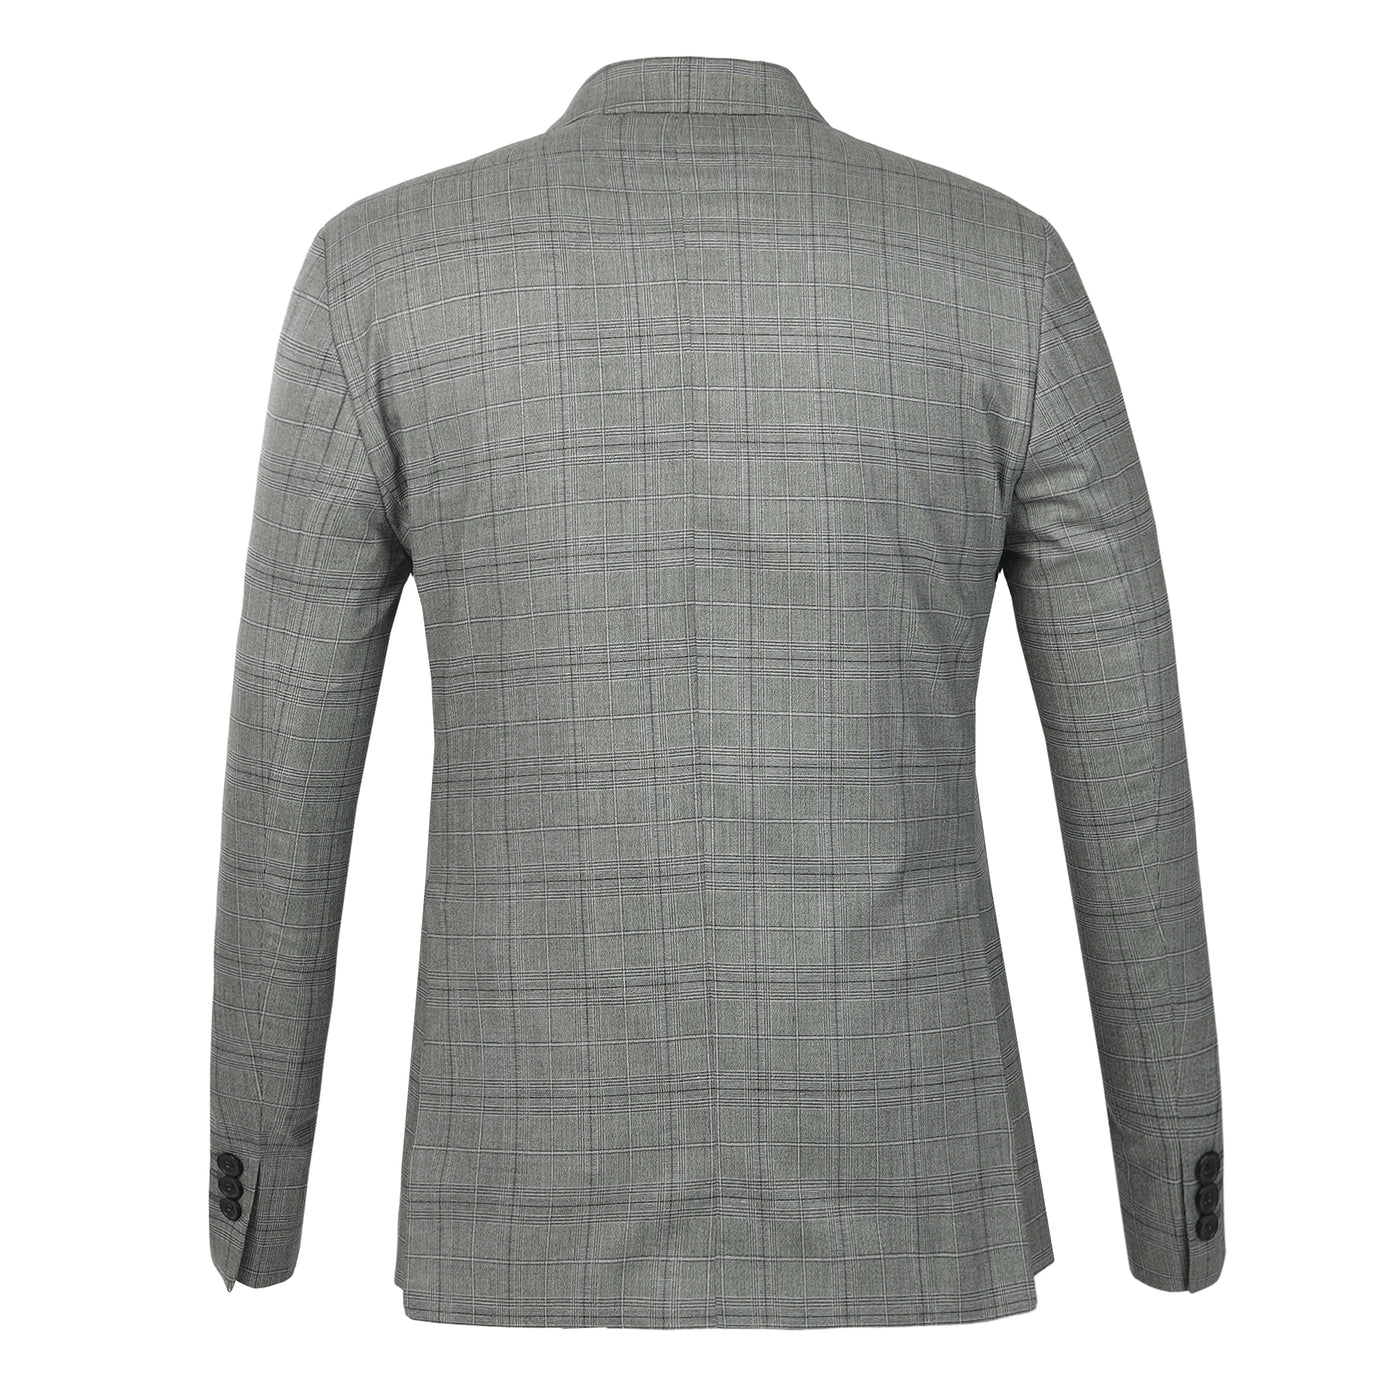 Checked Knitted Gray Blazer